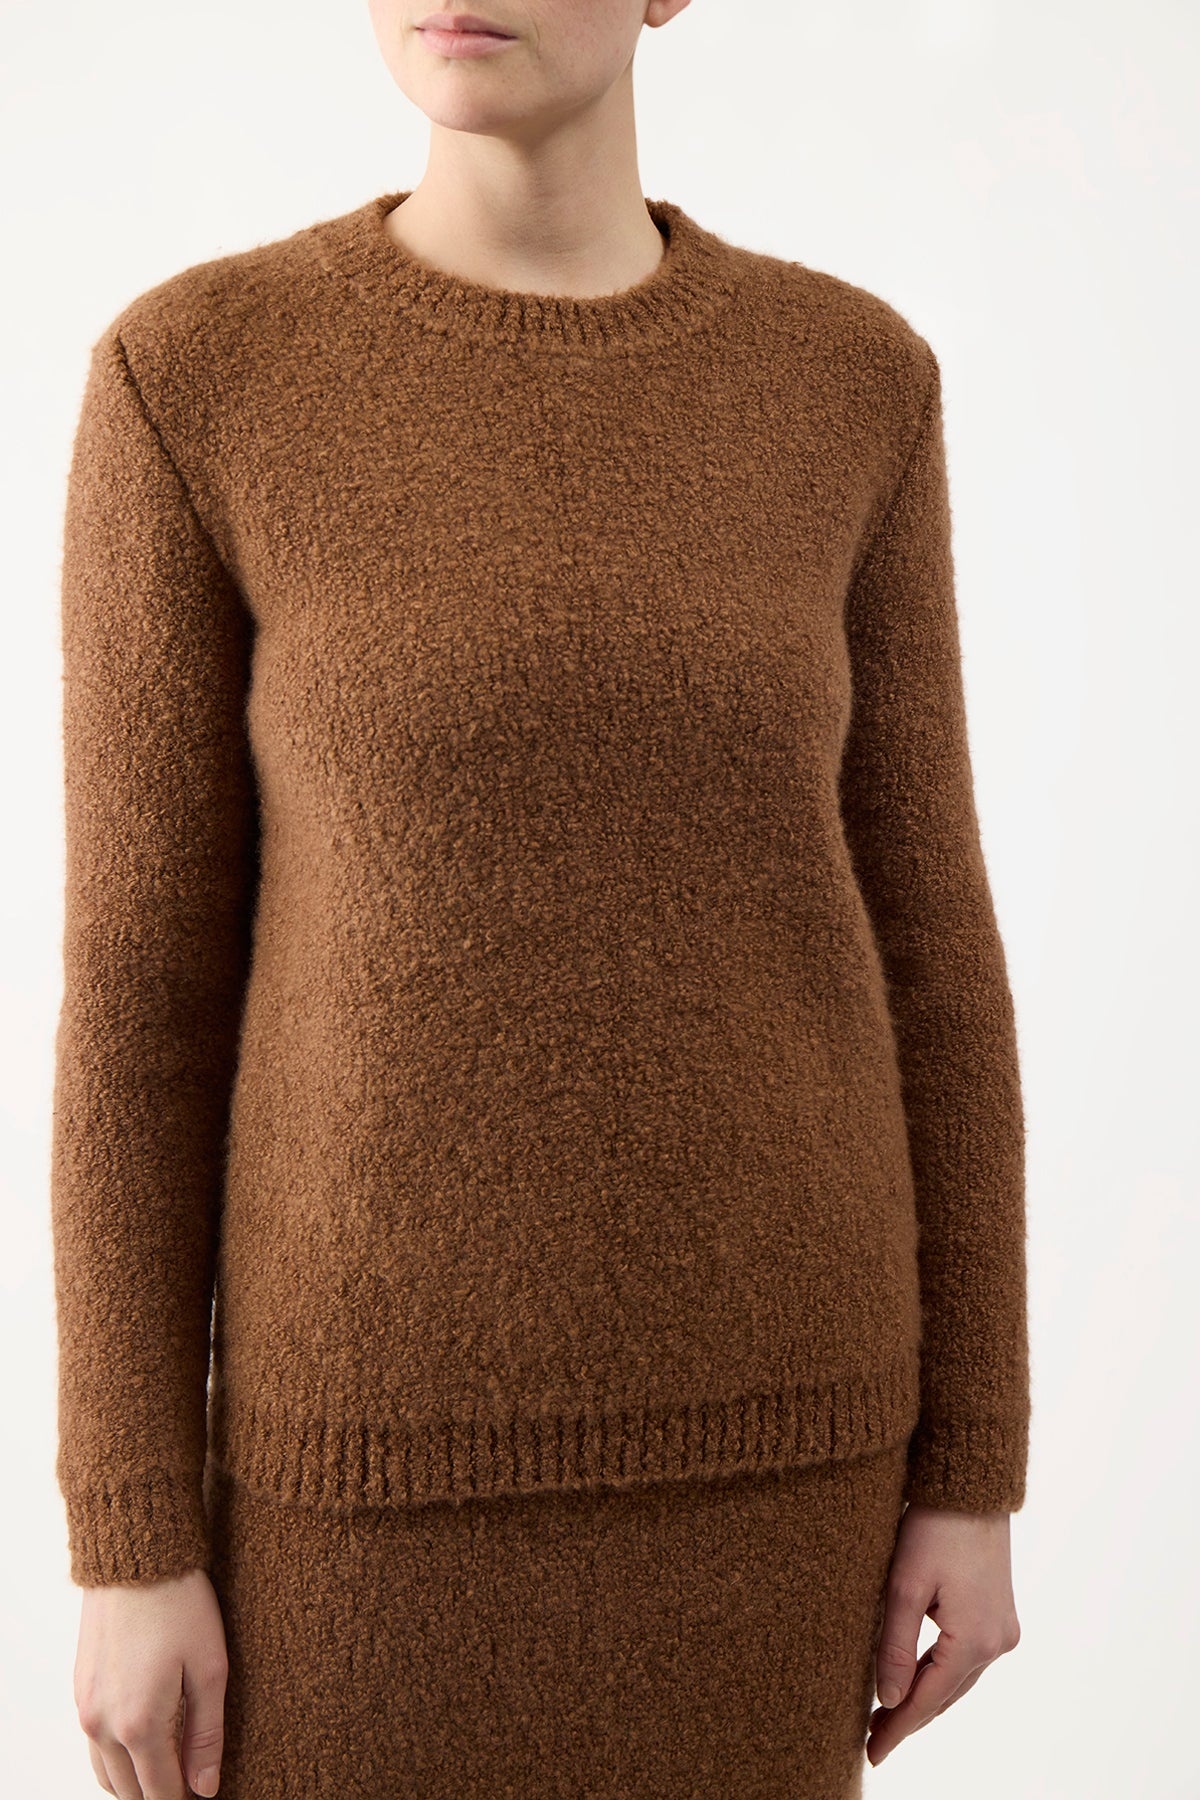 Philippe Sweater in Cashmere Boucle - 5